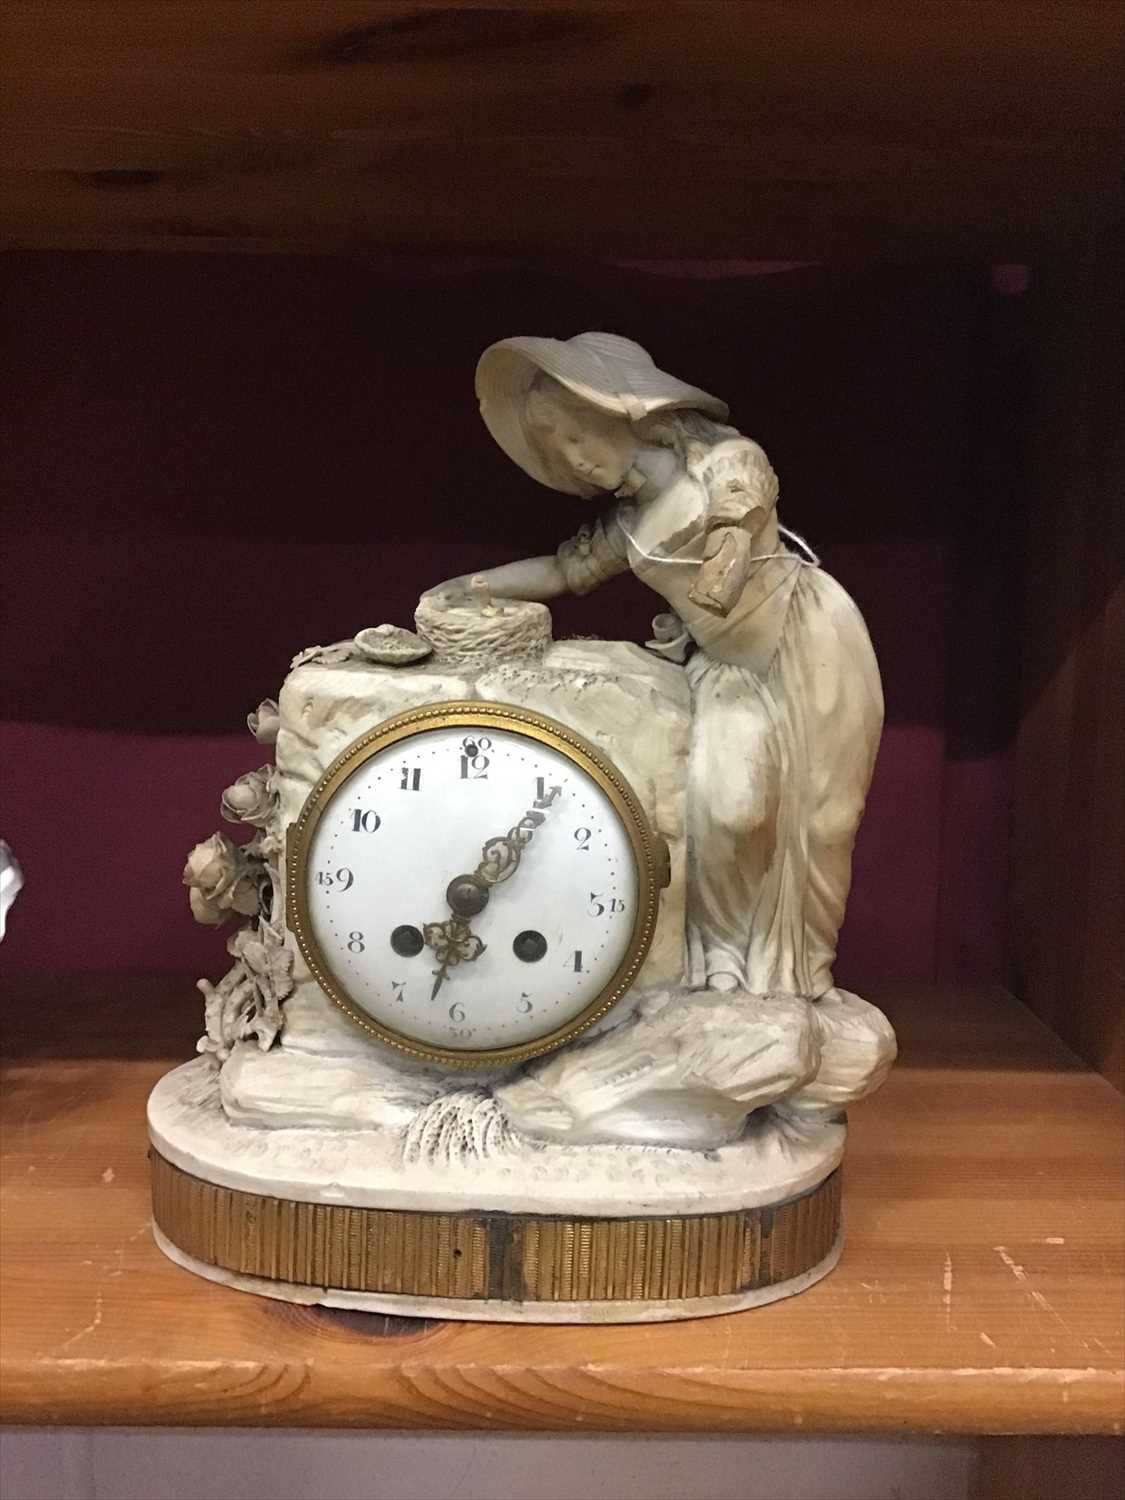 Lot 140 - 19th century French bisque mantel clock with white enamel dial and gilt mounts